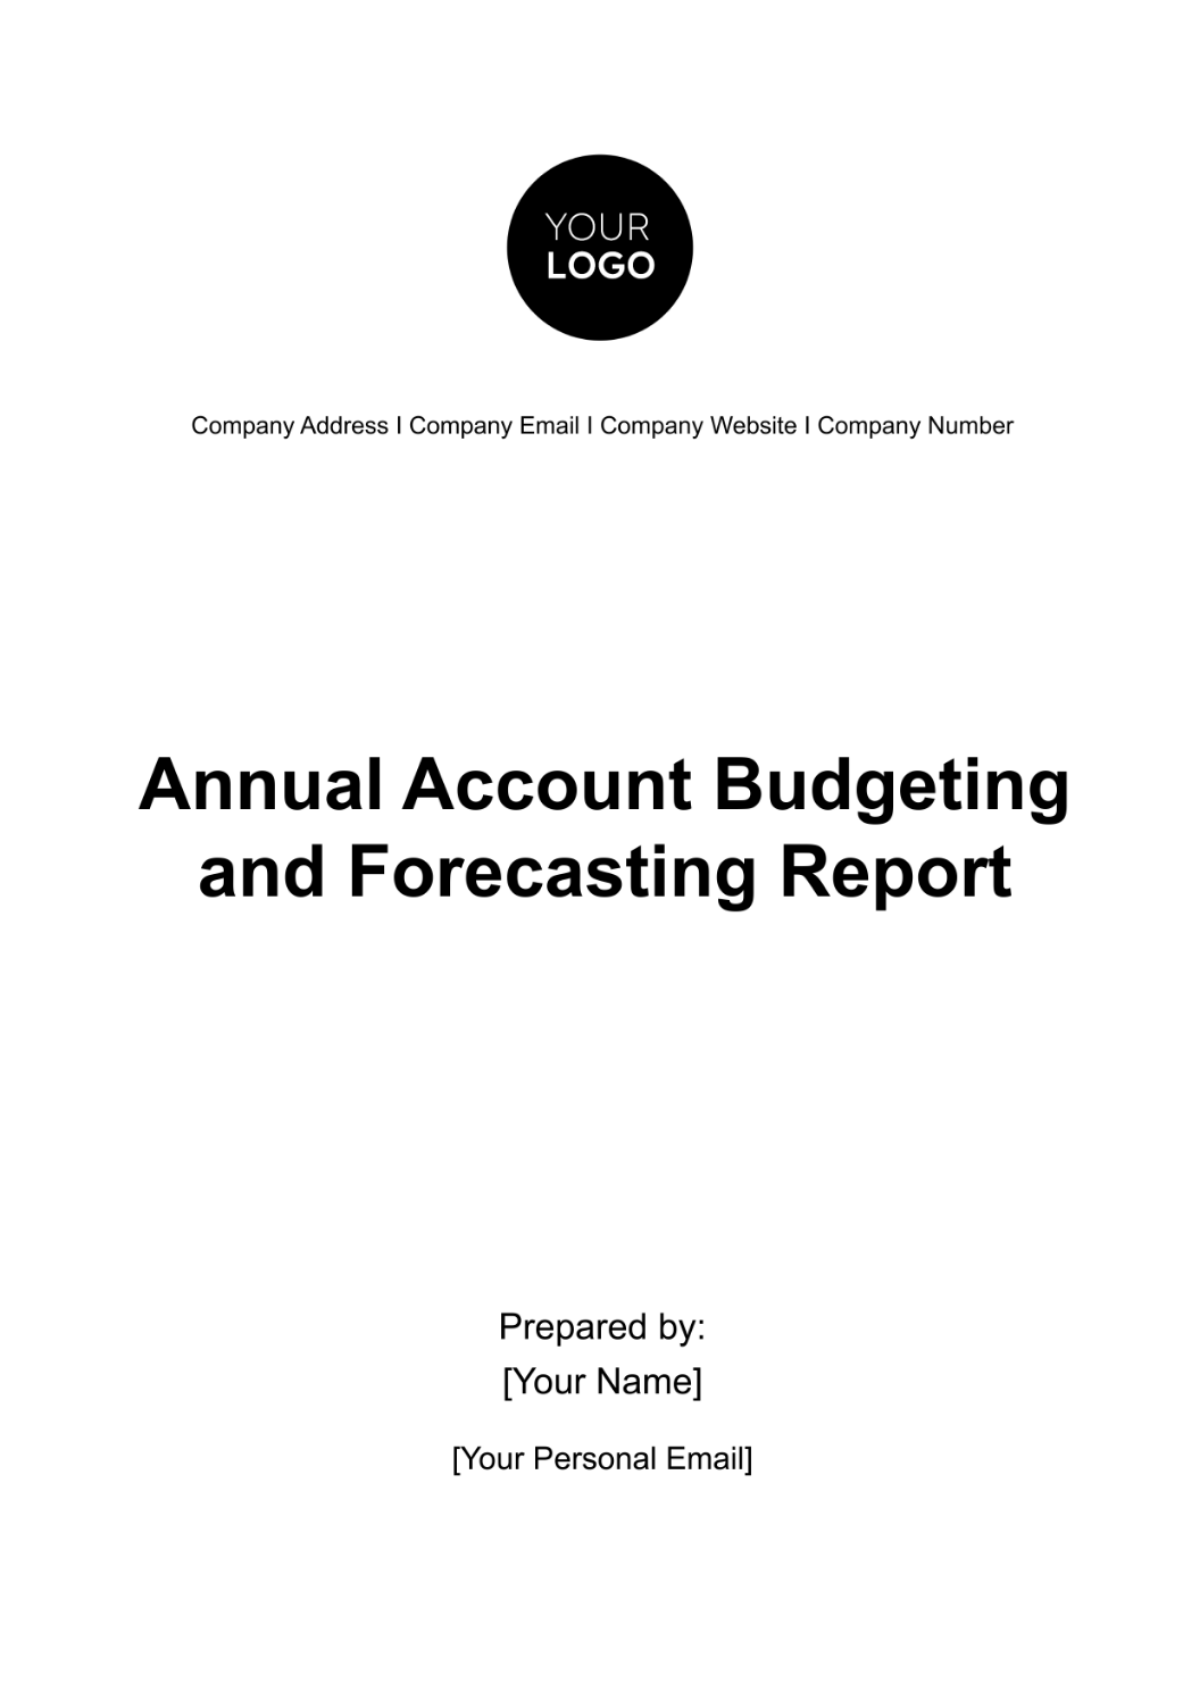 Free Annual Account Budgeting and Forecasting Report Template